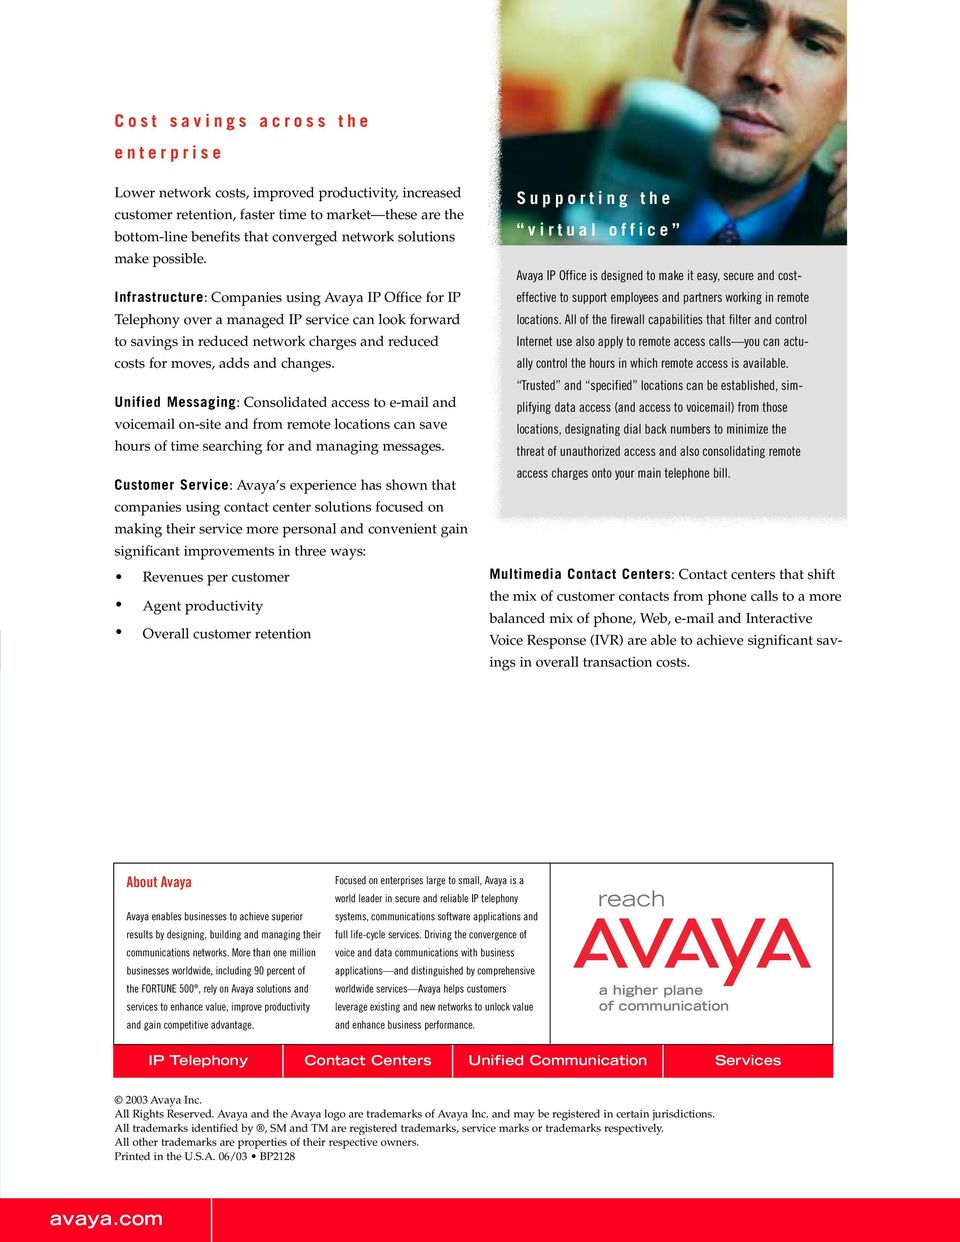 Infrastructure: Companies using Avaya IP Office for IP Telephony over a managed IP service can look forward to savings in reduced network charges and reduced costs for moves, adds and changes.